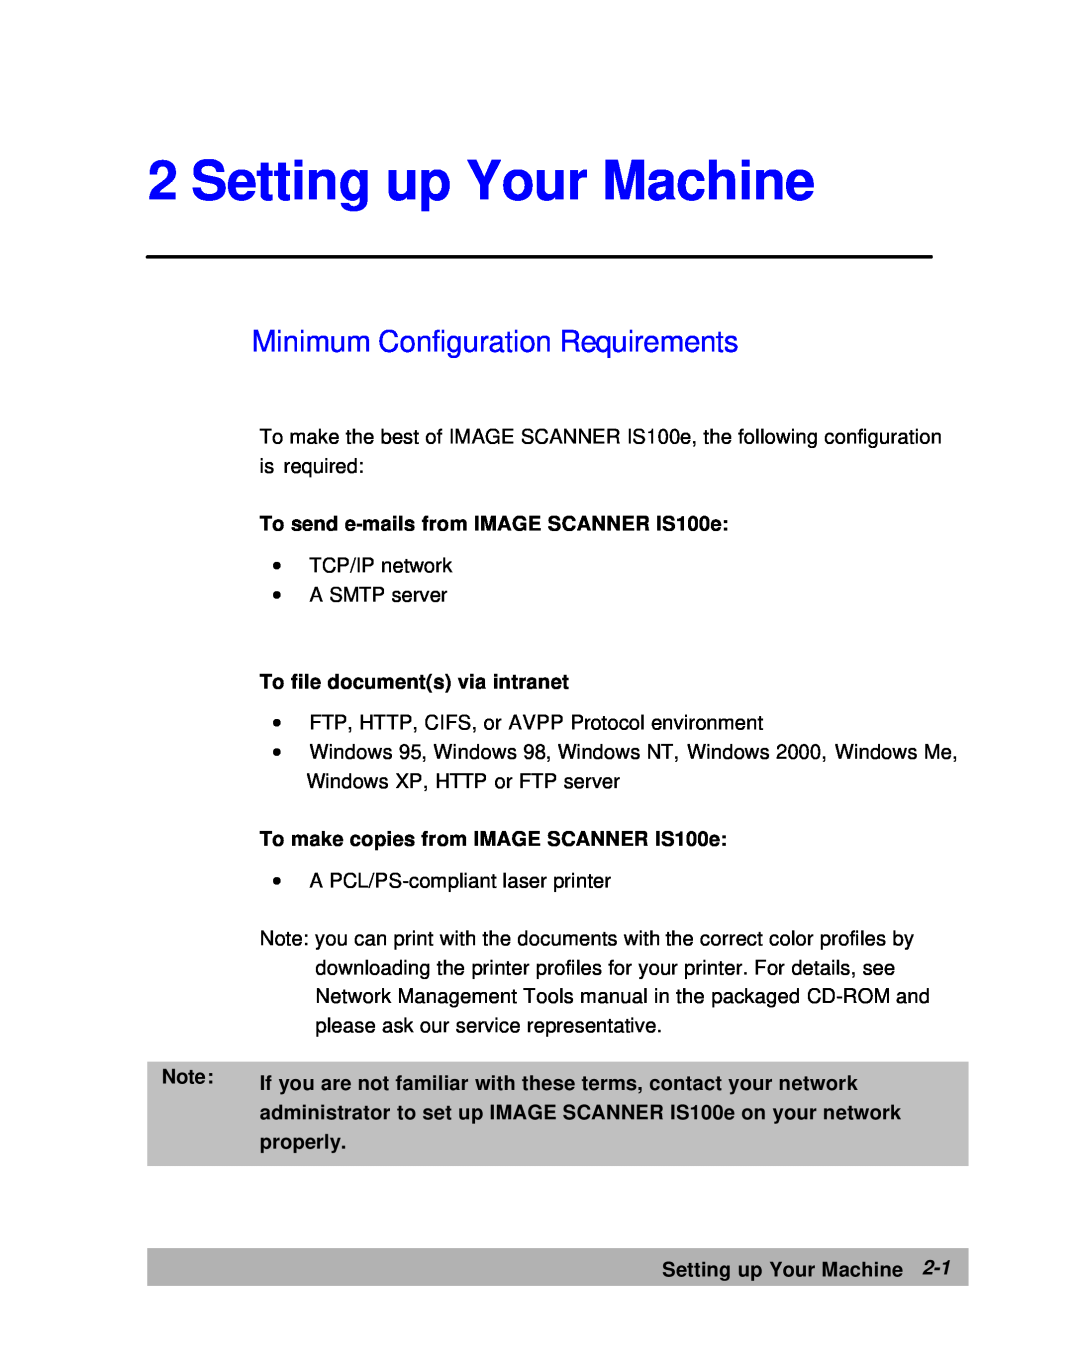 Lanier Setting up Your Machine, Minimum Configuration Requirements, To send e-mails from IMAGE SCANNER IS100e, properly 